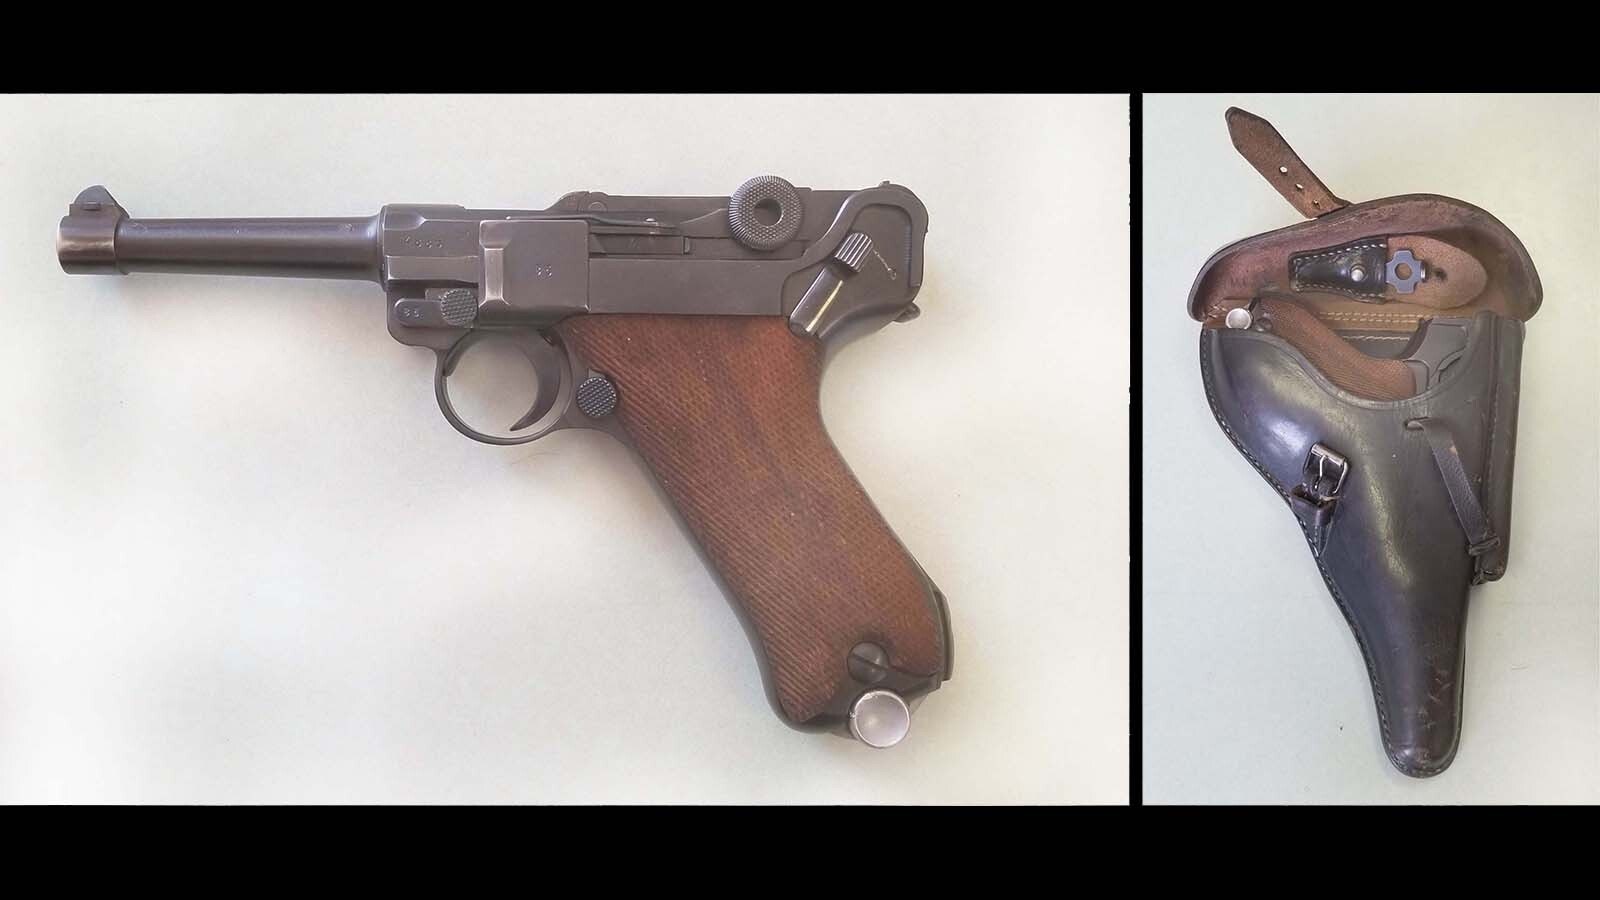 This Luger, a classic German semi-automatic pistol, is a Mauser Banner Police Model chambered for the 9x19 mm cartridge, 4-inch barrel, blued finish and walnut grips. It was manufactured in 1940 by Mauser at its Oberndorf plant.